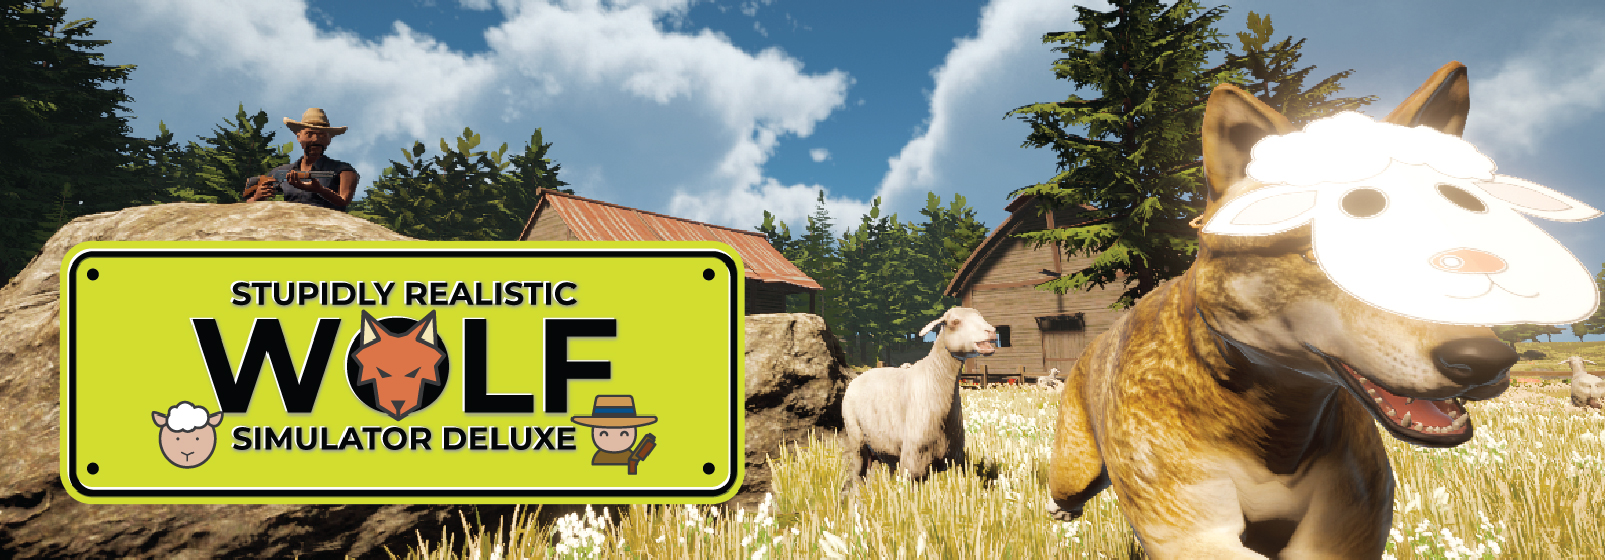 Stupidly Realistic Wolf Simulator Deluxe